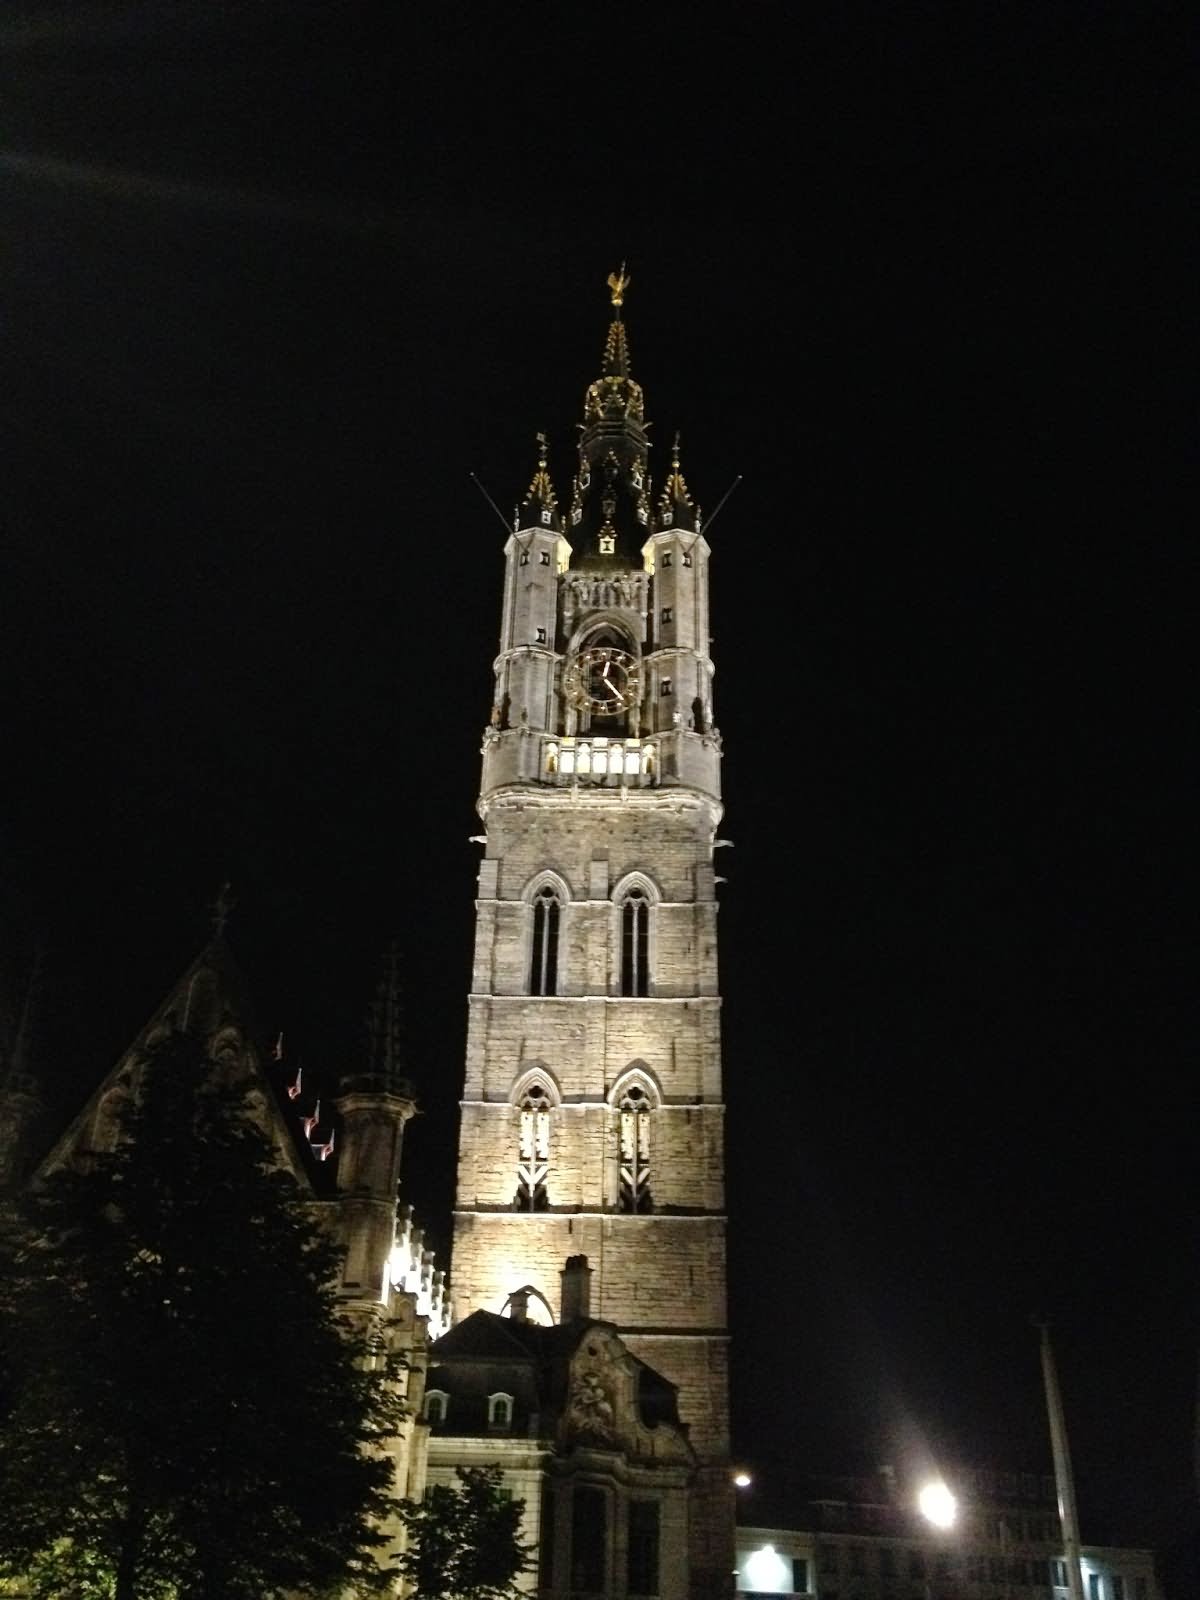 Front View Of The Belfry Of Ghent At Night